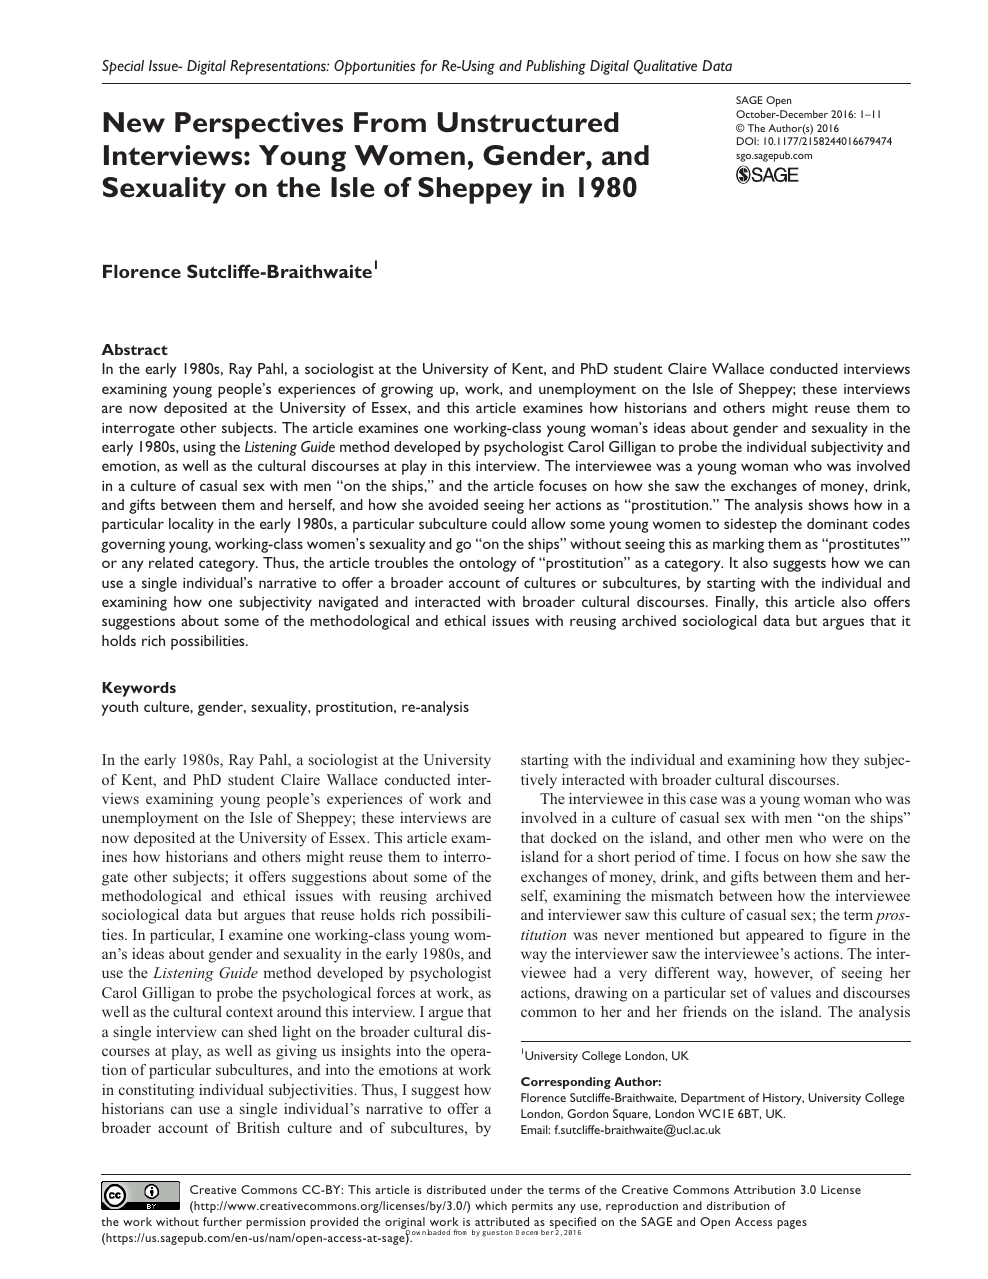 New Perspectives From Unstructured Interviews Young Women, Gender, and Sexuality on the Isle of Sheppey in 1980 image